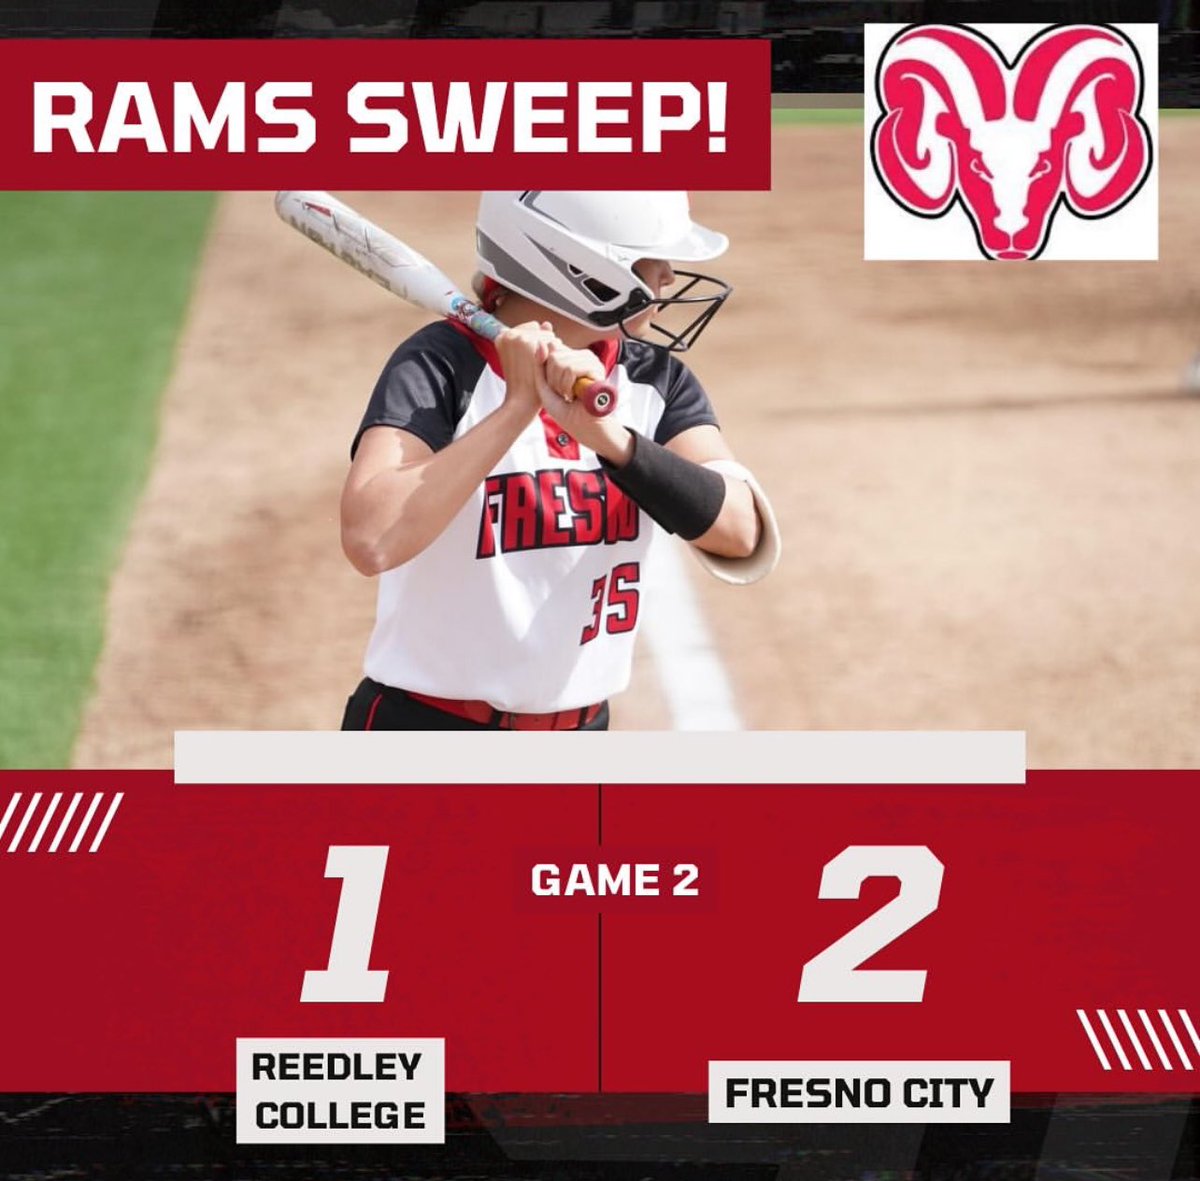 Rams SWEEP 🧹🧹 Reedley College 💪 That’s 1️⃣2️⃣ WINS in a ROW 10-0 in Conference 21-5 Overall